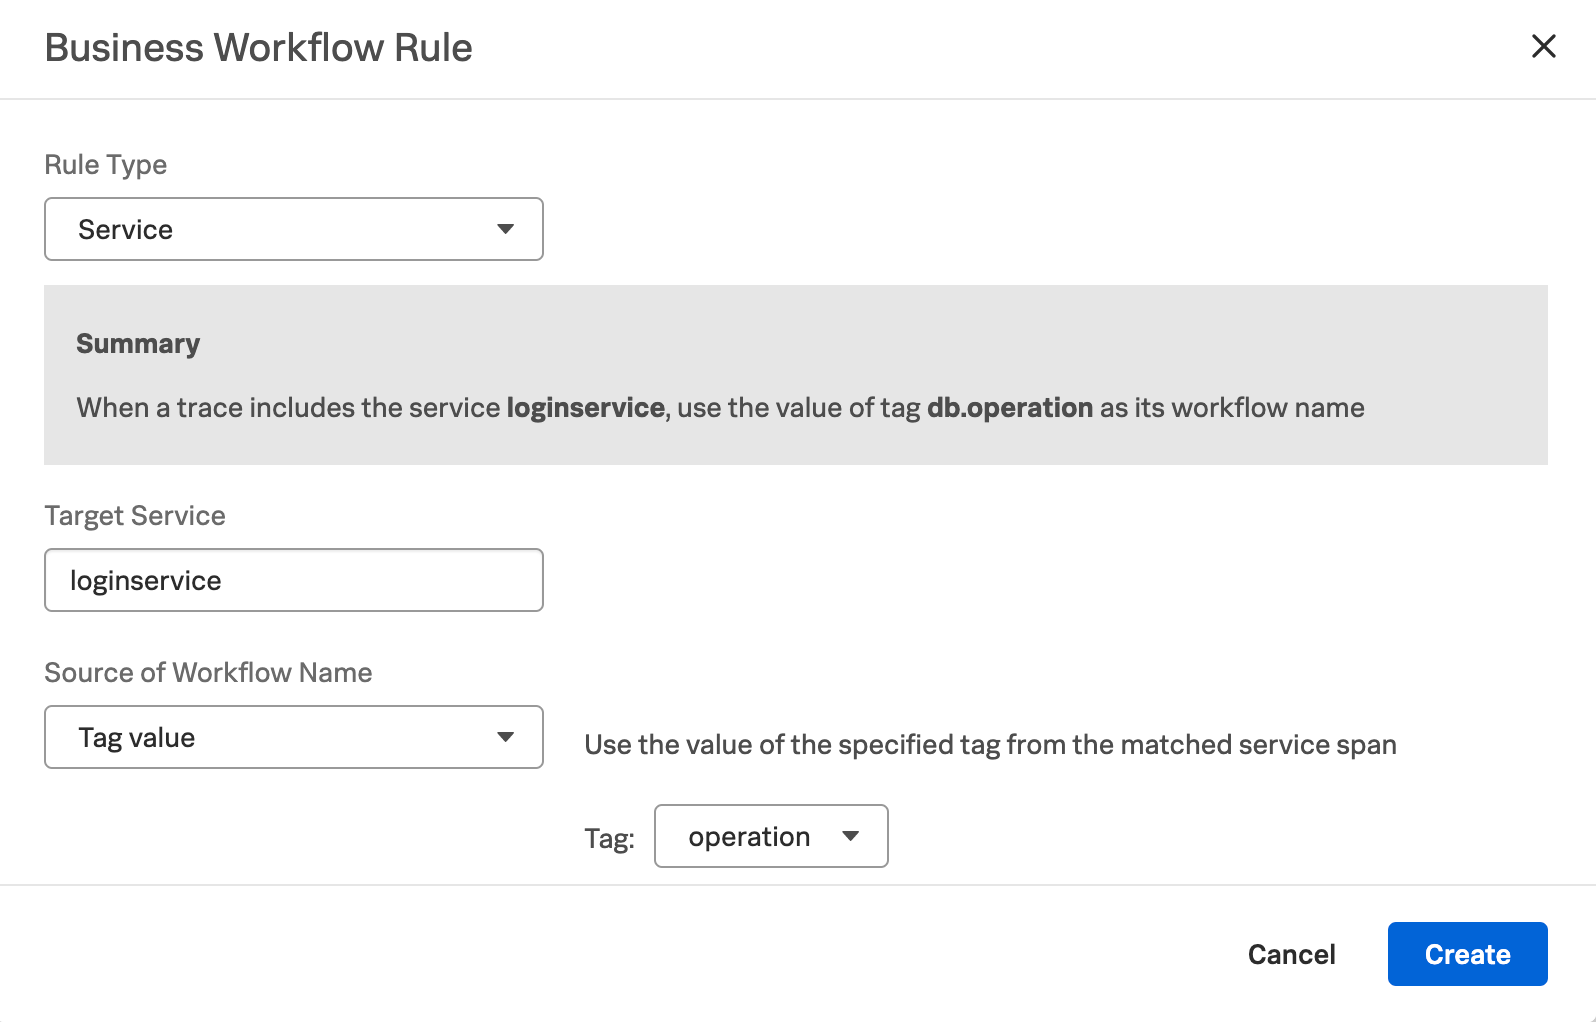 This screenshot shows the rule setup for a service workflow rule. that uses a tag value for correlating traces.